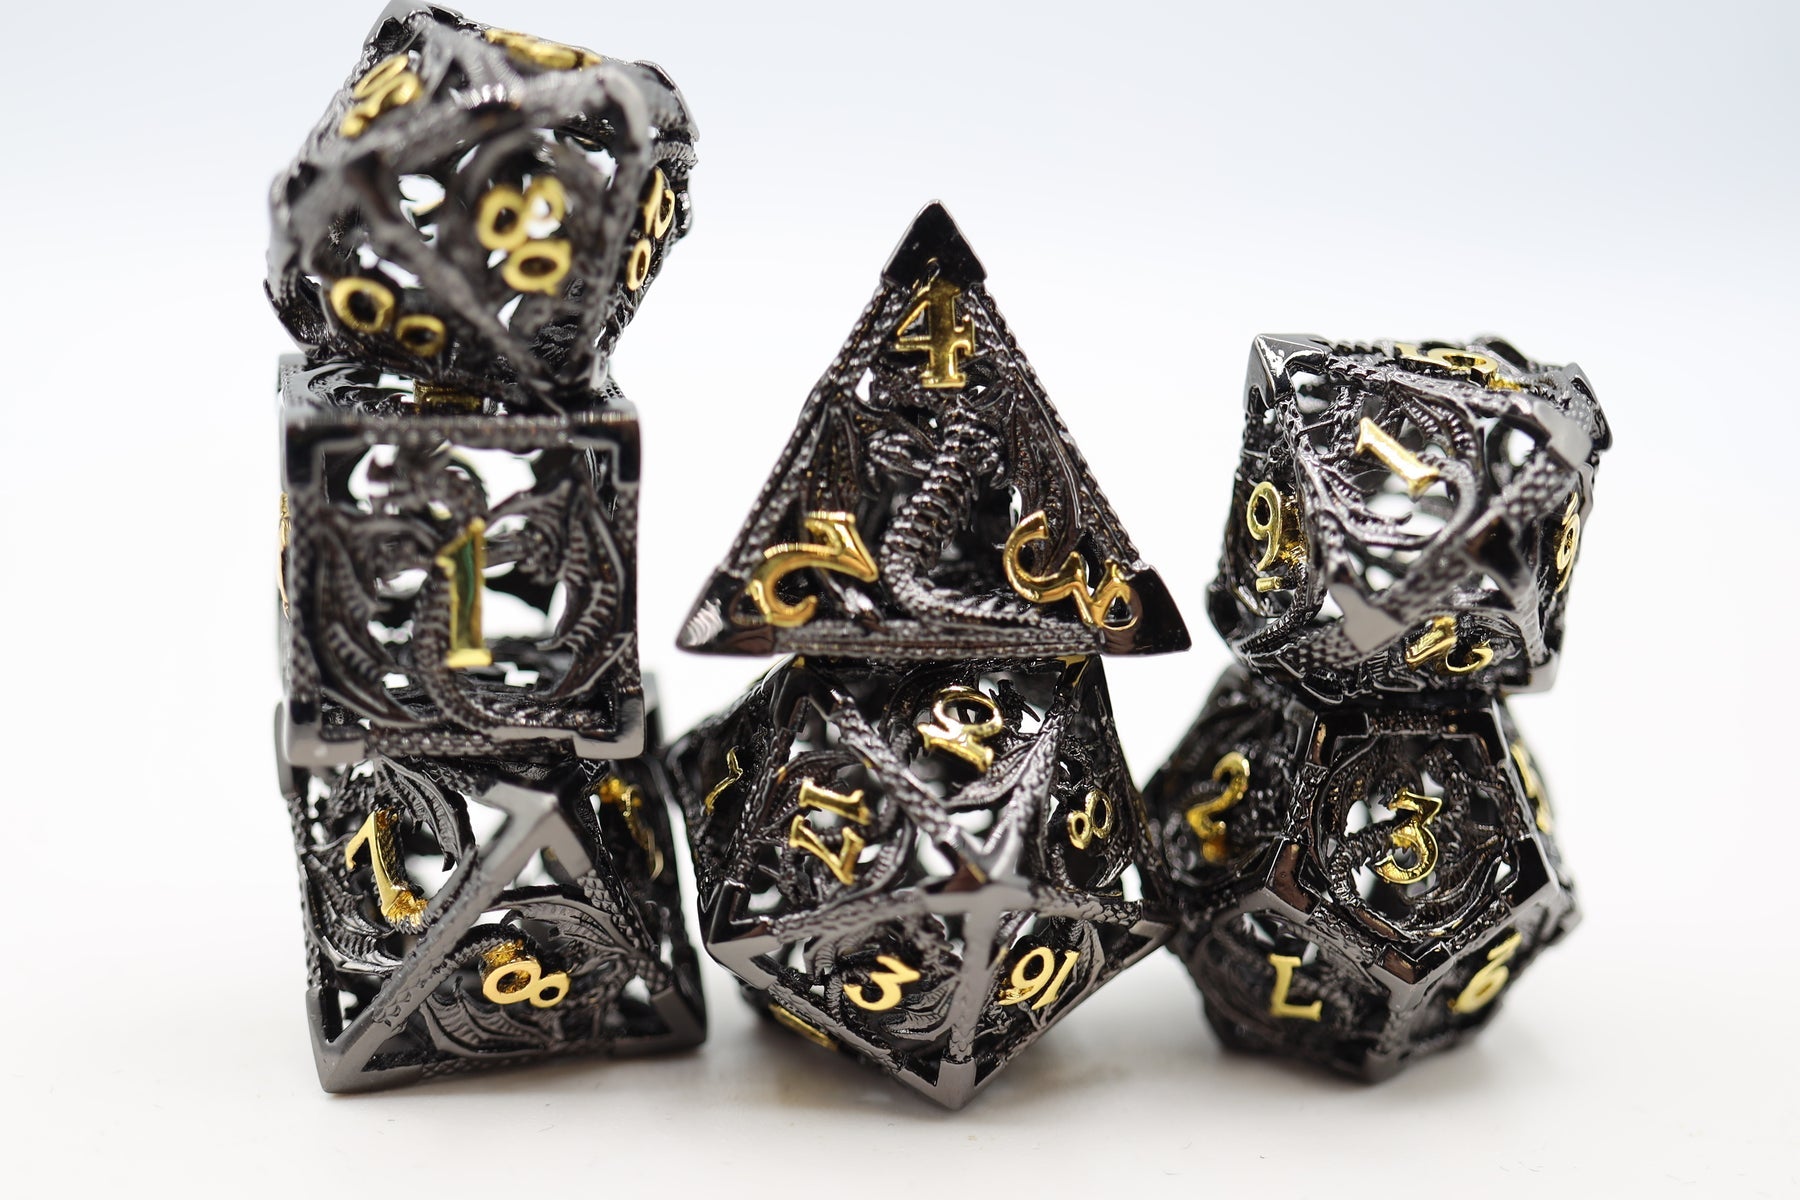 Chained Hollow Night Dragon RPG Metal Dice Set | Grognard Games